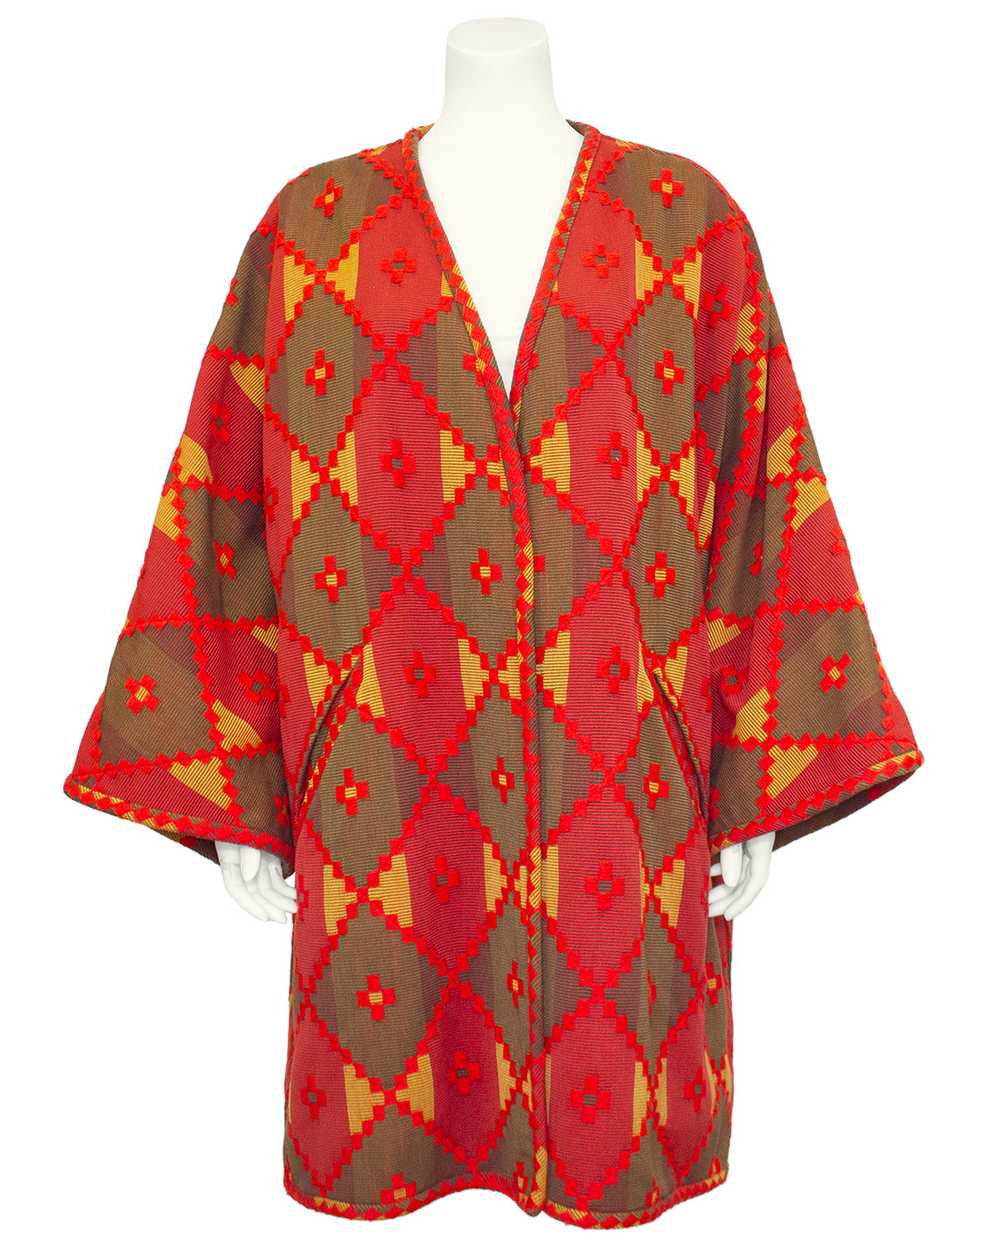 Valentino Red and Brown Embroidered Aztec Jacket - image 3